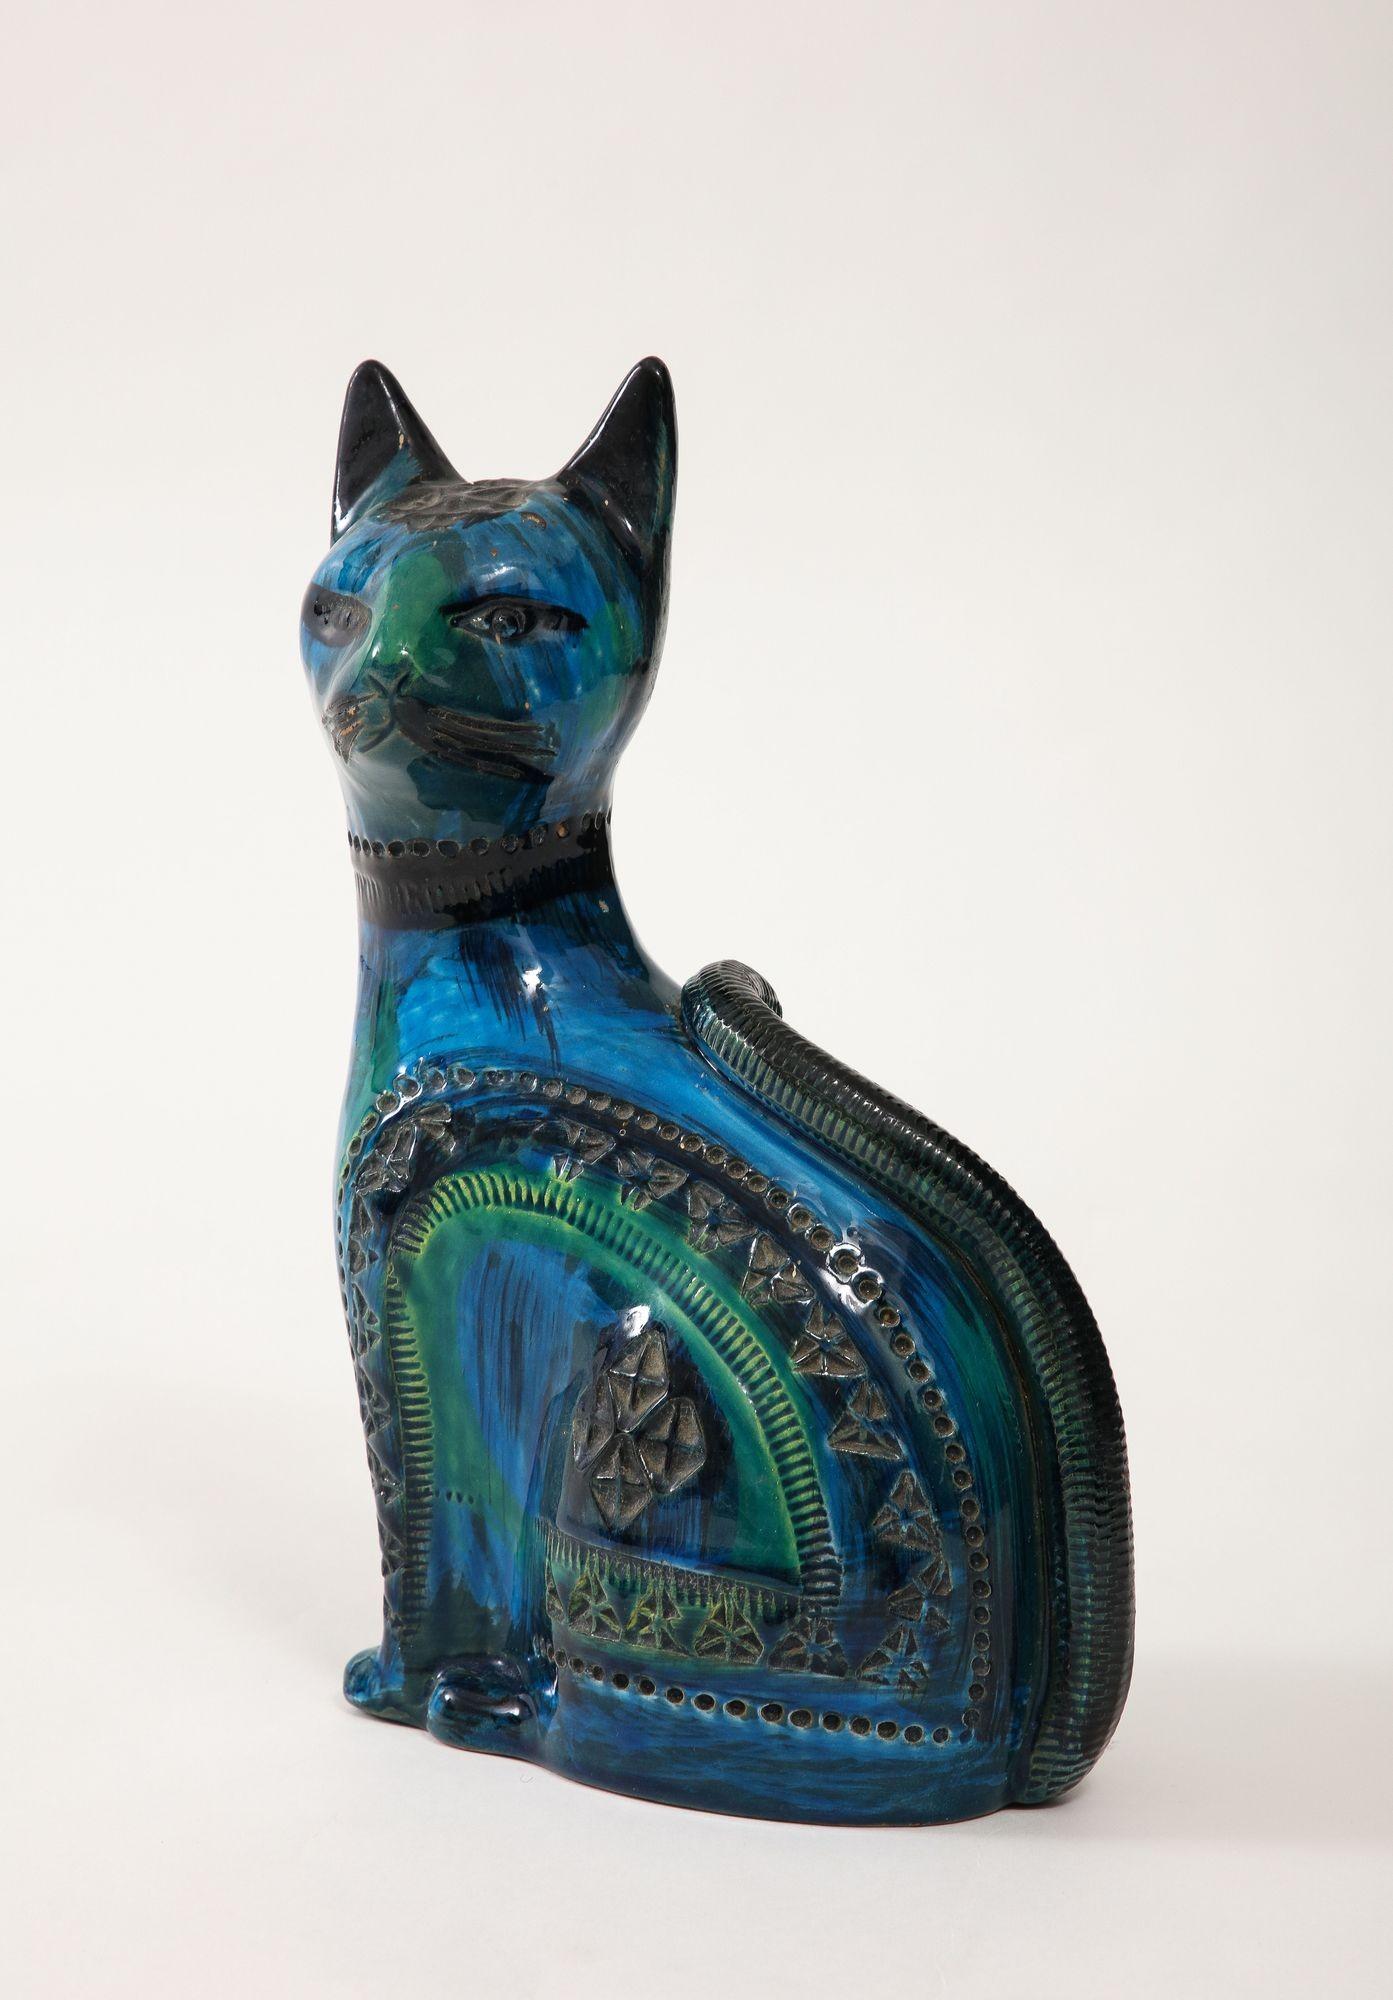 Aldo Londi's Ceramic Cat for Bitossi, crafted in the iconic 'Rimini blue' glaze circa 1960, is a masterpiece of Italian ceramic artistry. Standing as a testament to Londi's creative genius, this feline sculpture boasts a sleek and stylized form,